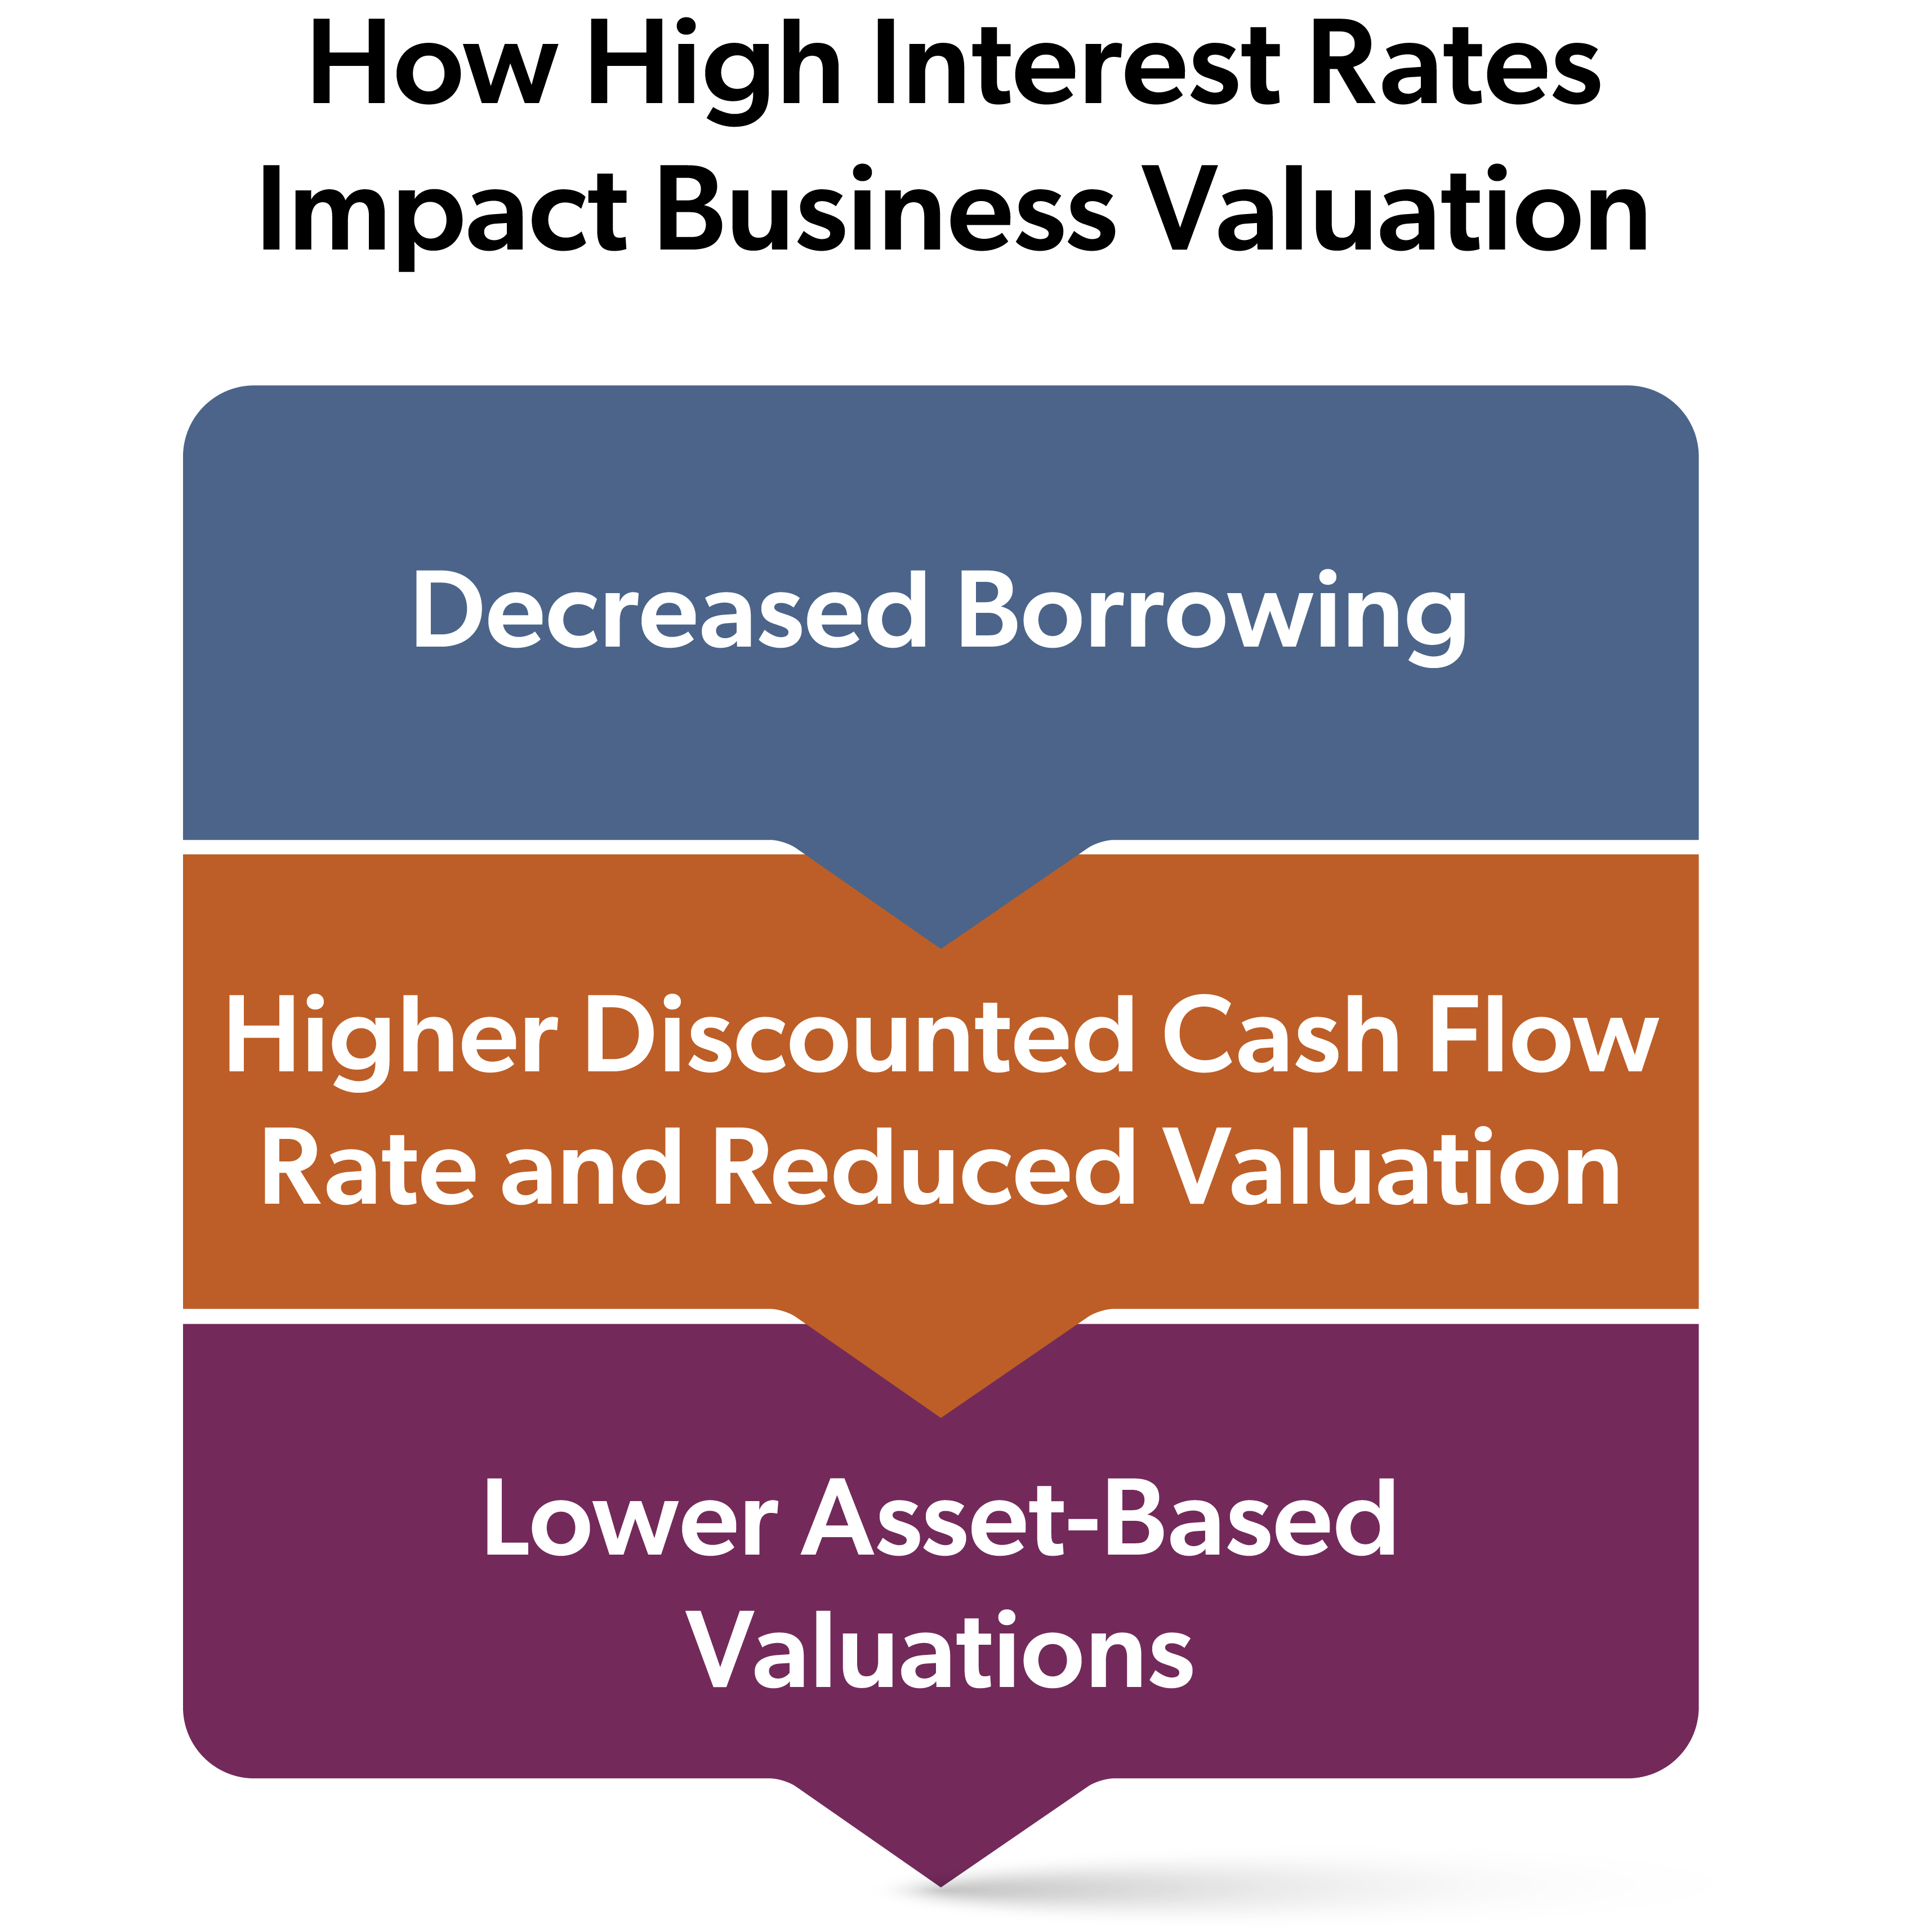 A visual representation of how high interest rates impact business valuation, showing decreased borrowing, effects on discounted cash flow and asset-based valuations.